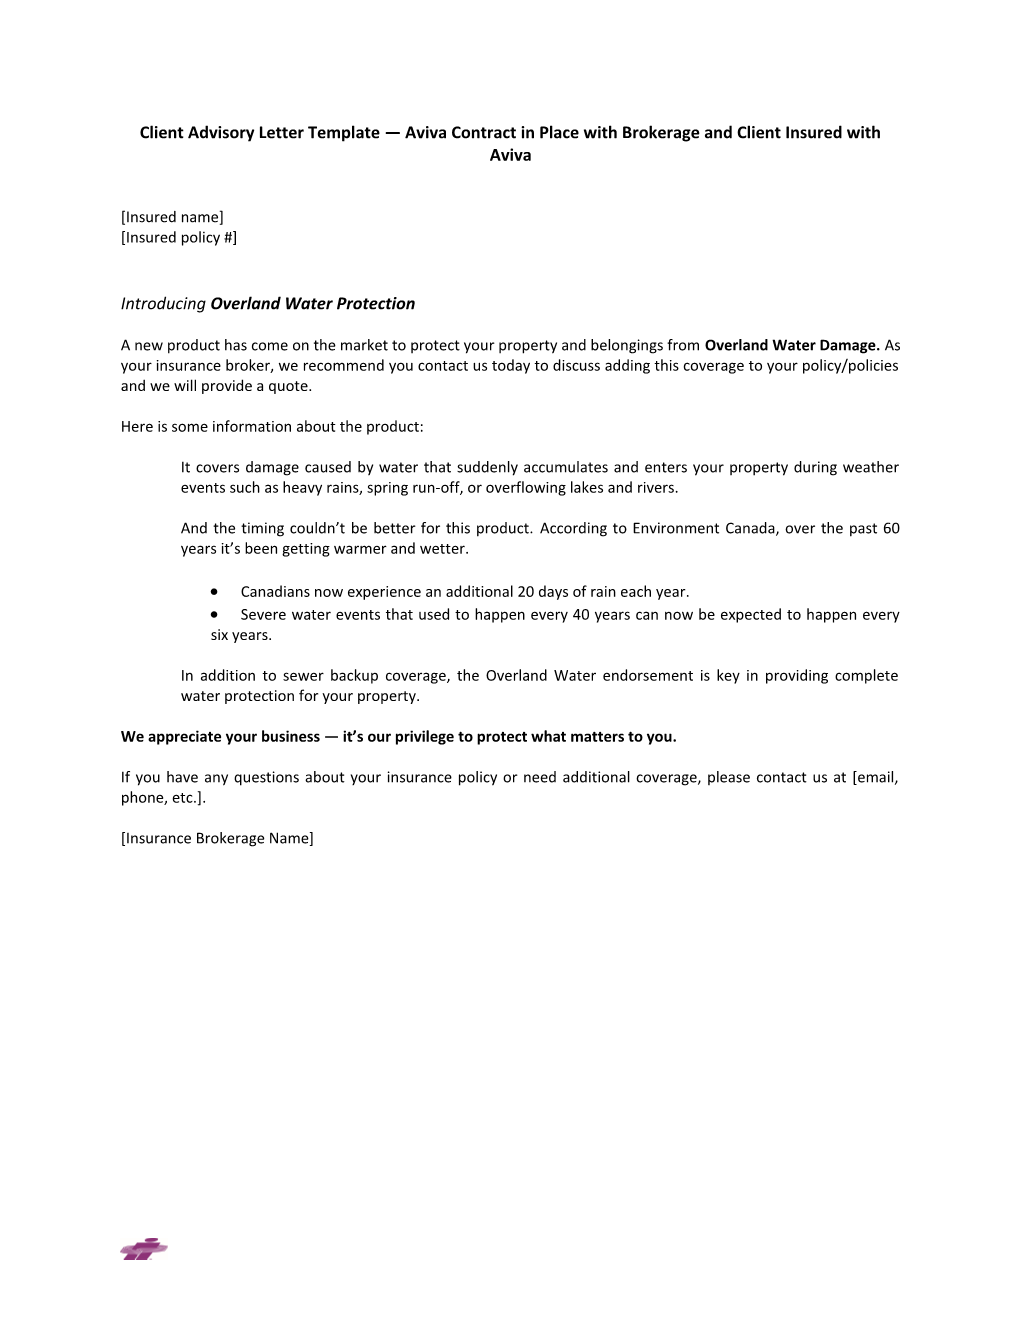 Client Advisory Letter Template Aviva Contract in Place with Brokerage and Client Insured